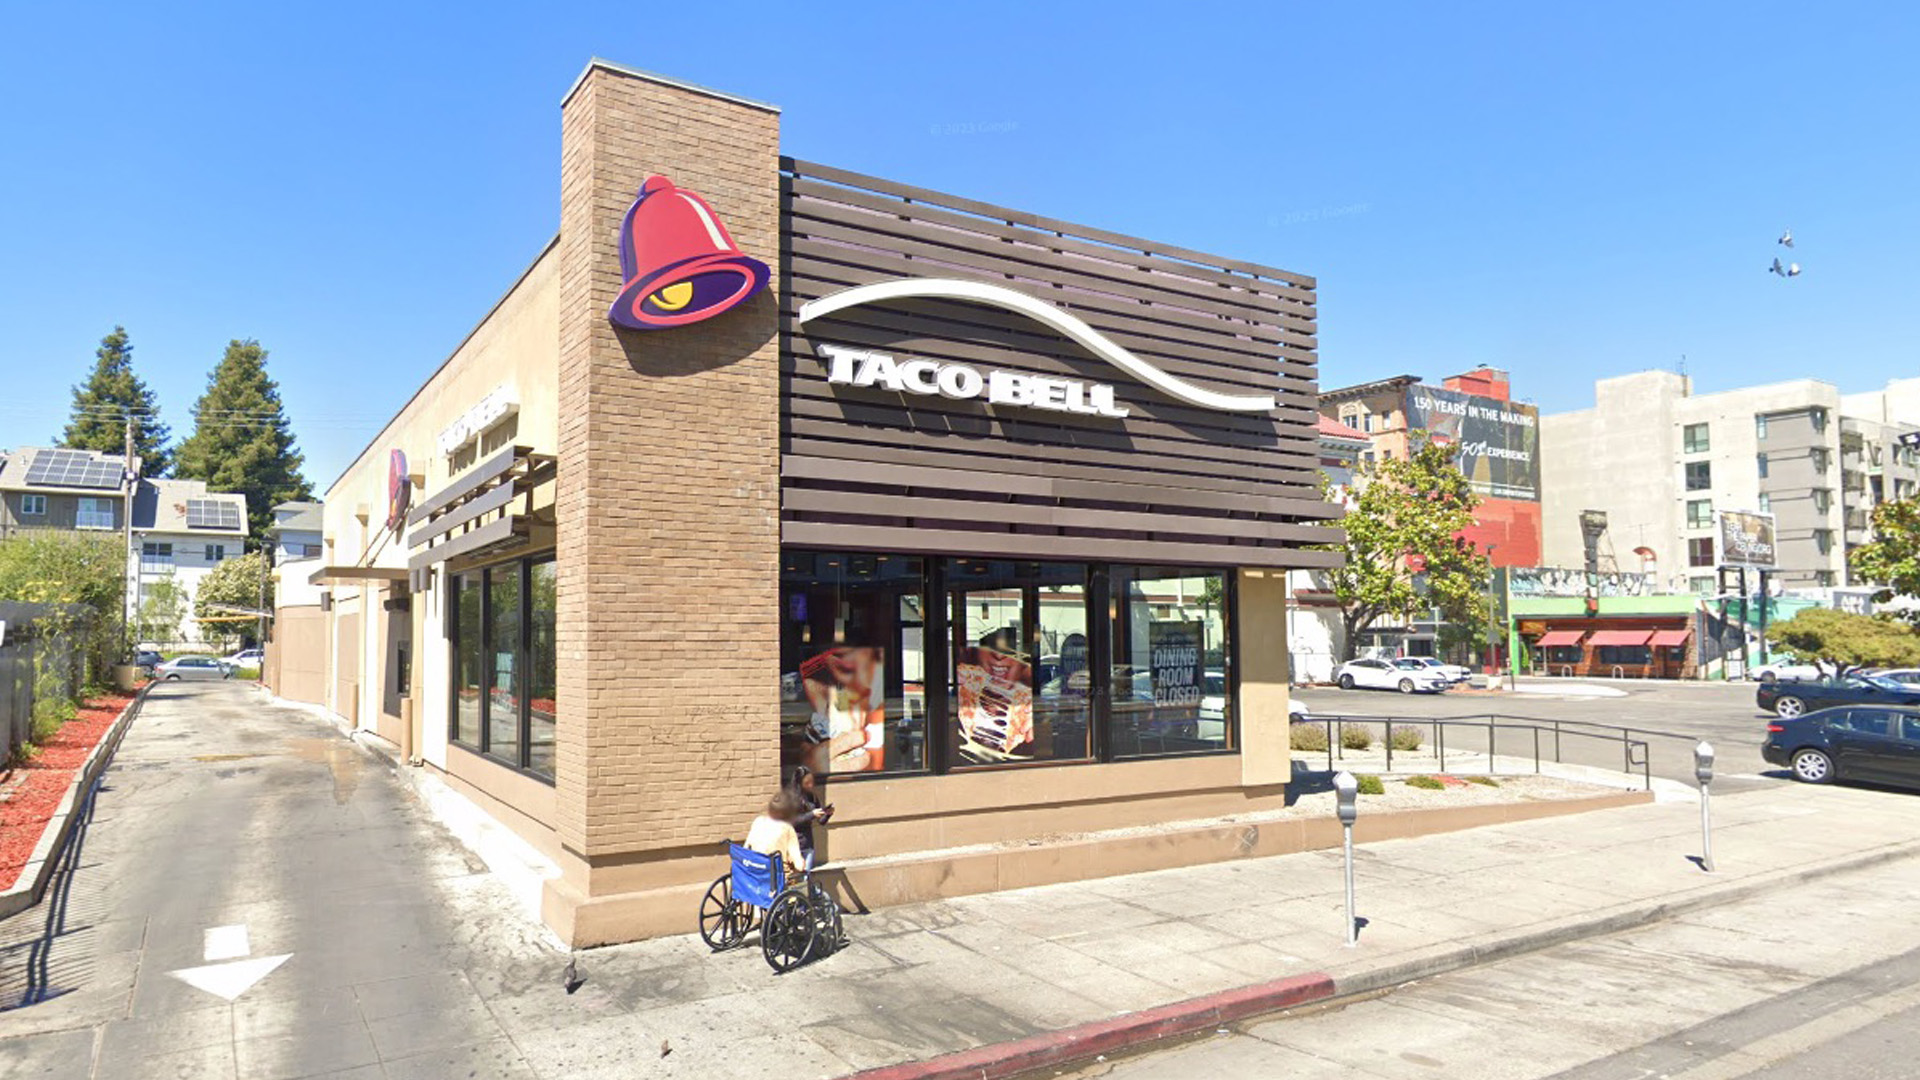 Second national chain follows in Taco Bell’s footsteps and closes in-store dining in ‘lawless’ US city [Video]